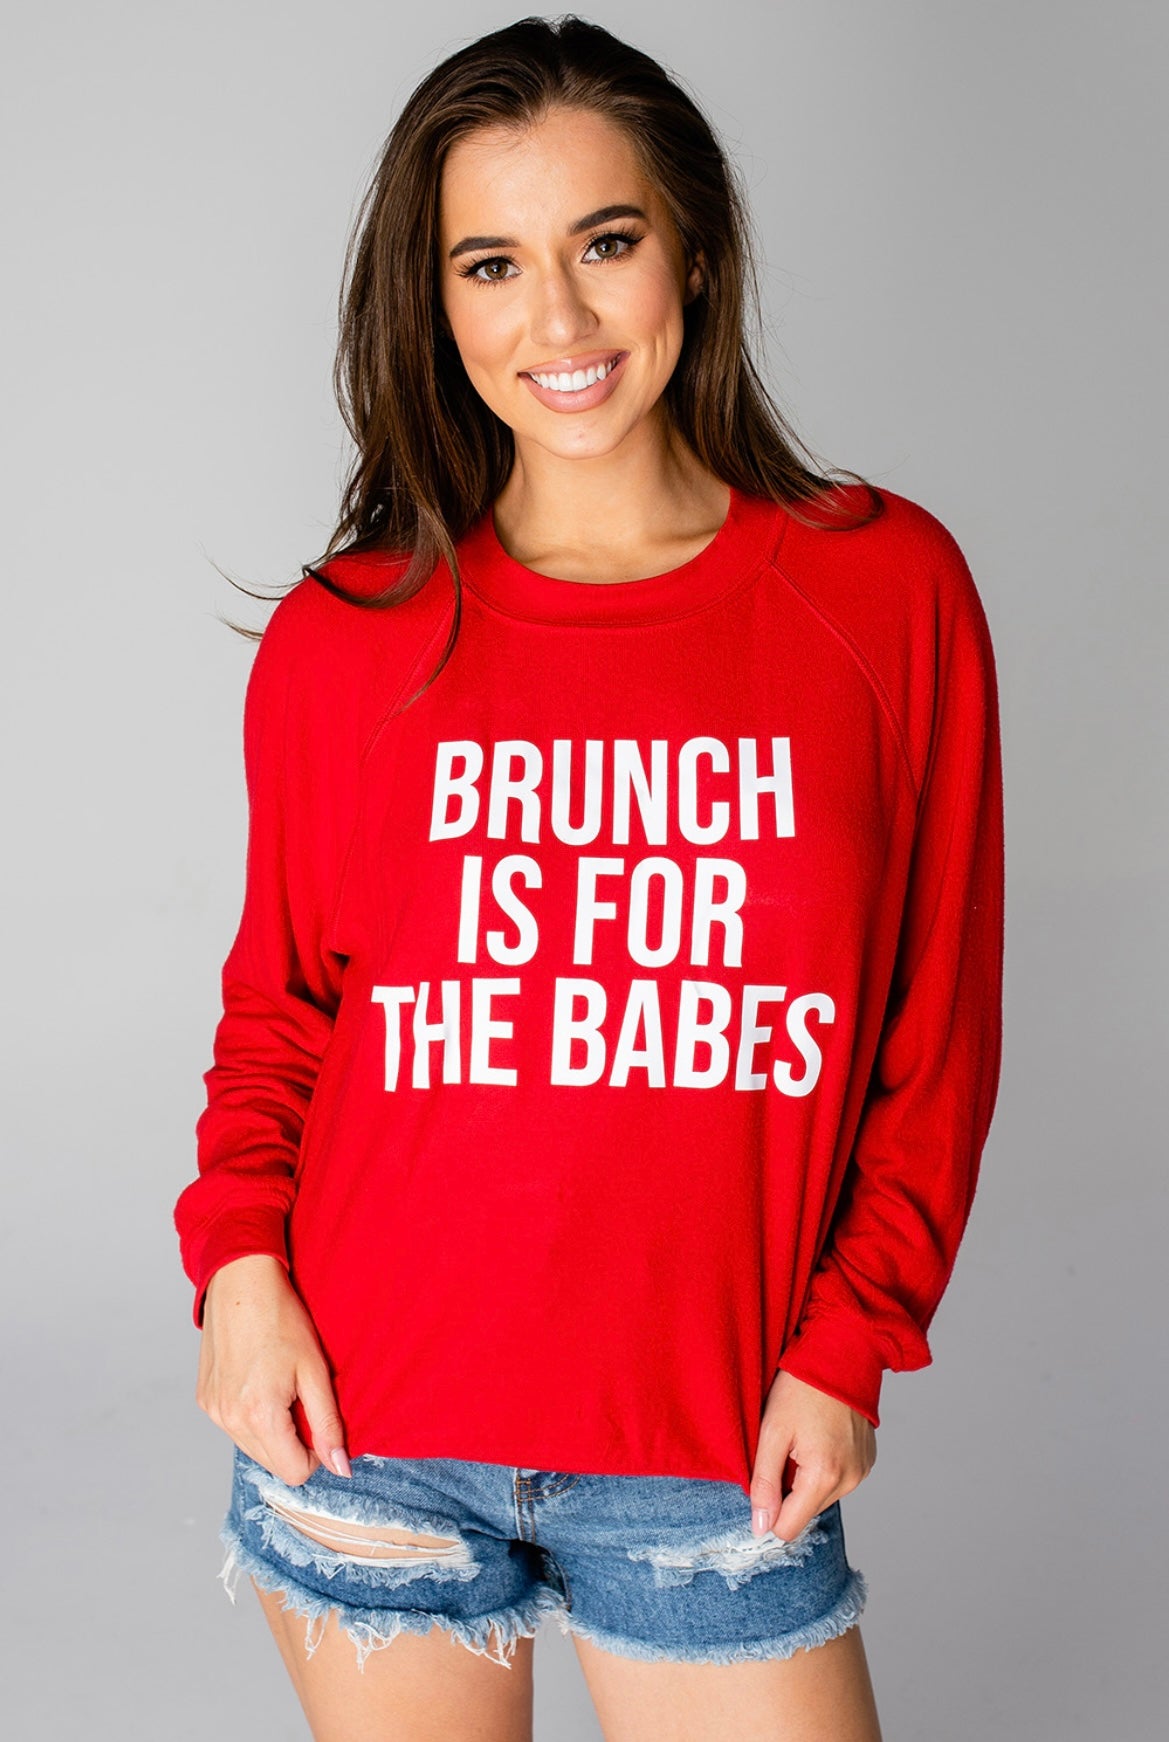 Brunch is for the Babes Sweatshirt